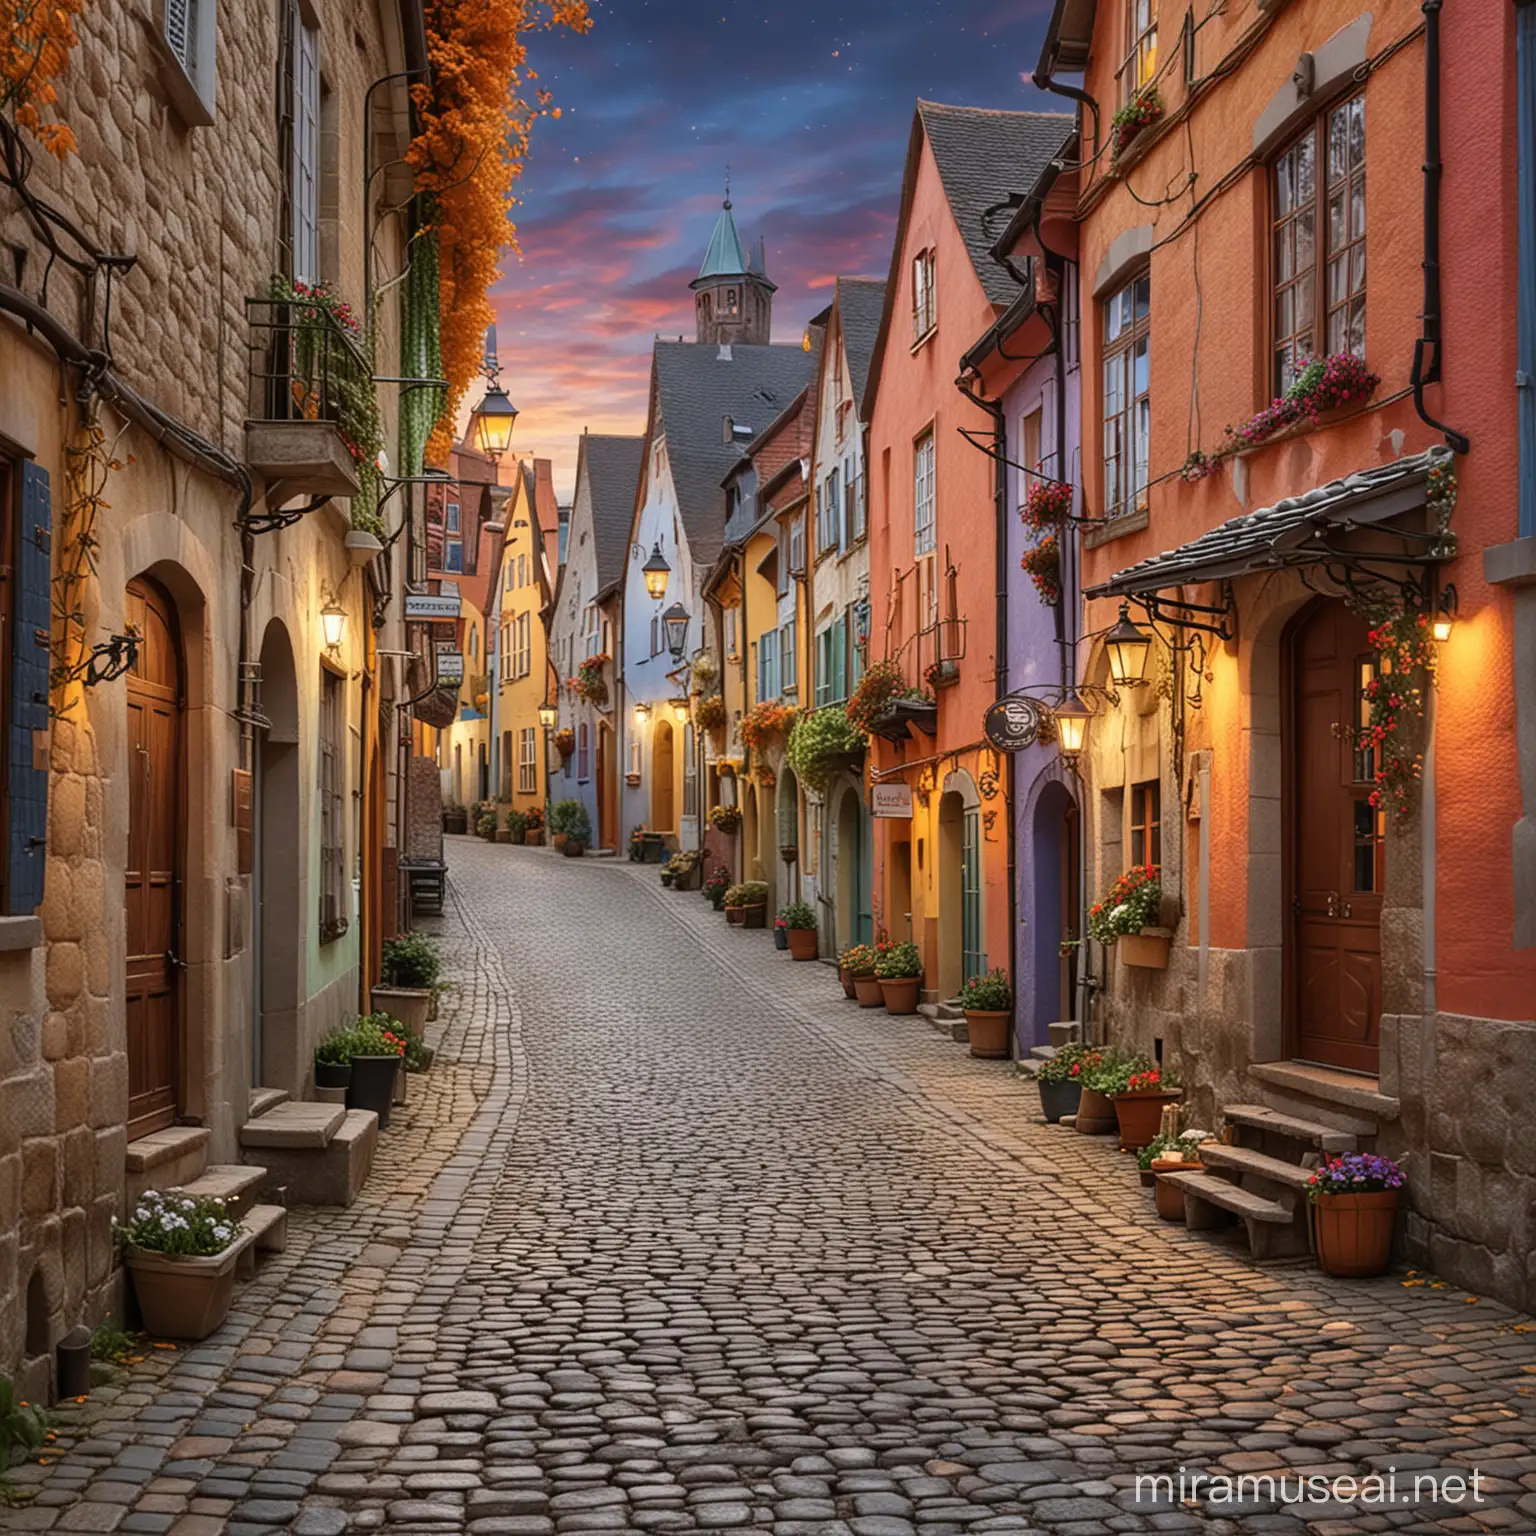 Enchanting Townscape Cobblestone Streets and Hanging Colorful Papers